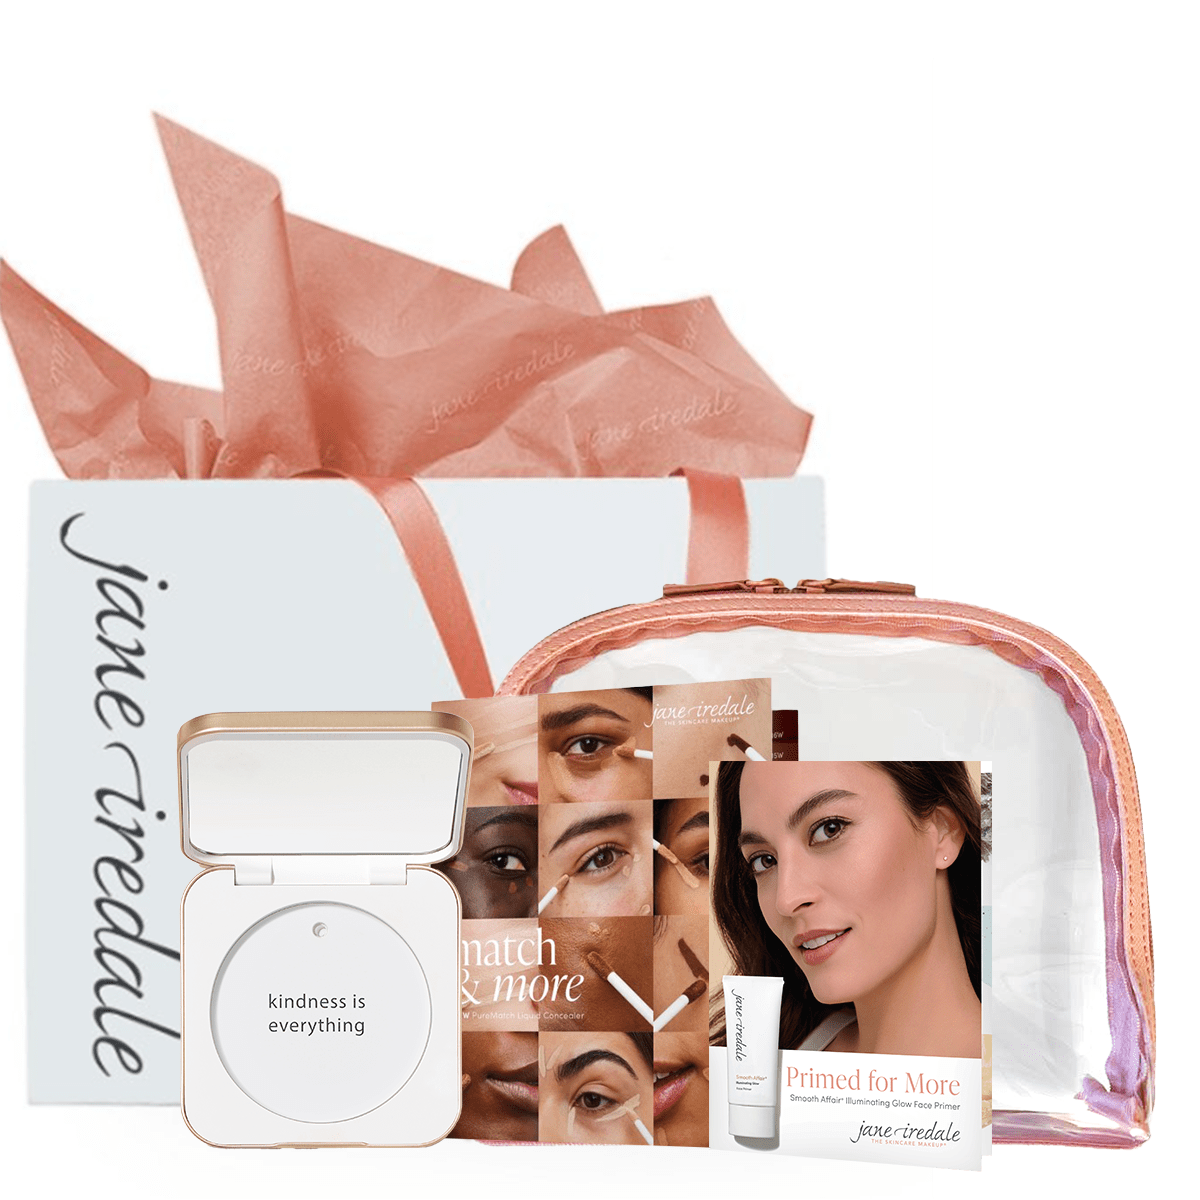 jane iredale Mother's Day